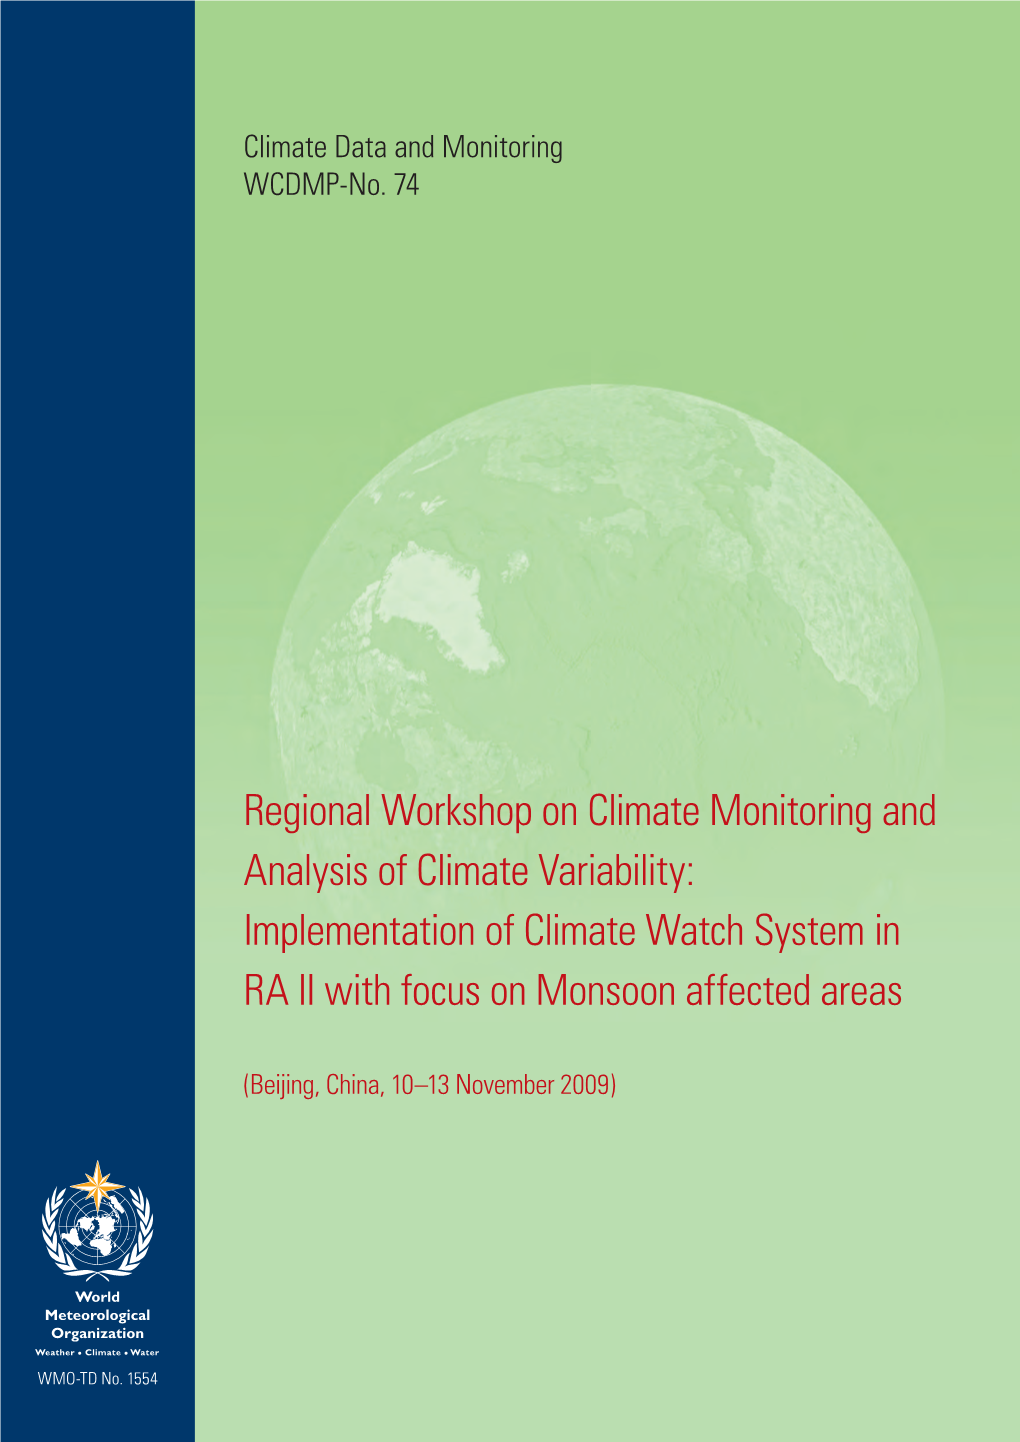 Regional Workshop on Climate Monitoring and Analysis of Climate Variability: Implementation of Climate Watch System in RA II with Focus on Monsoon Affected Areas